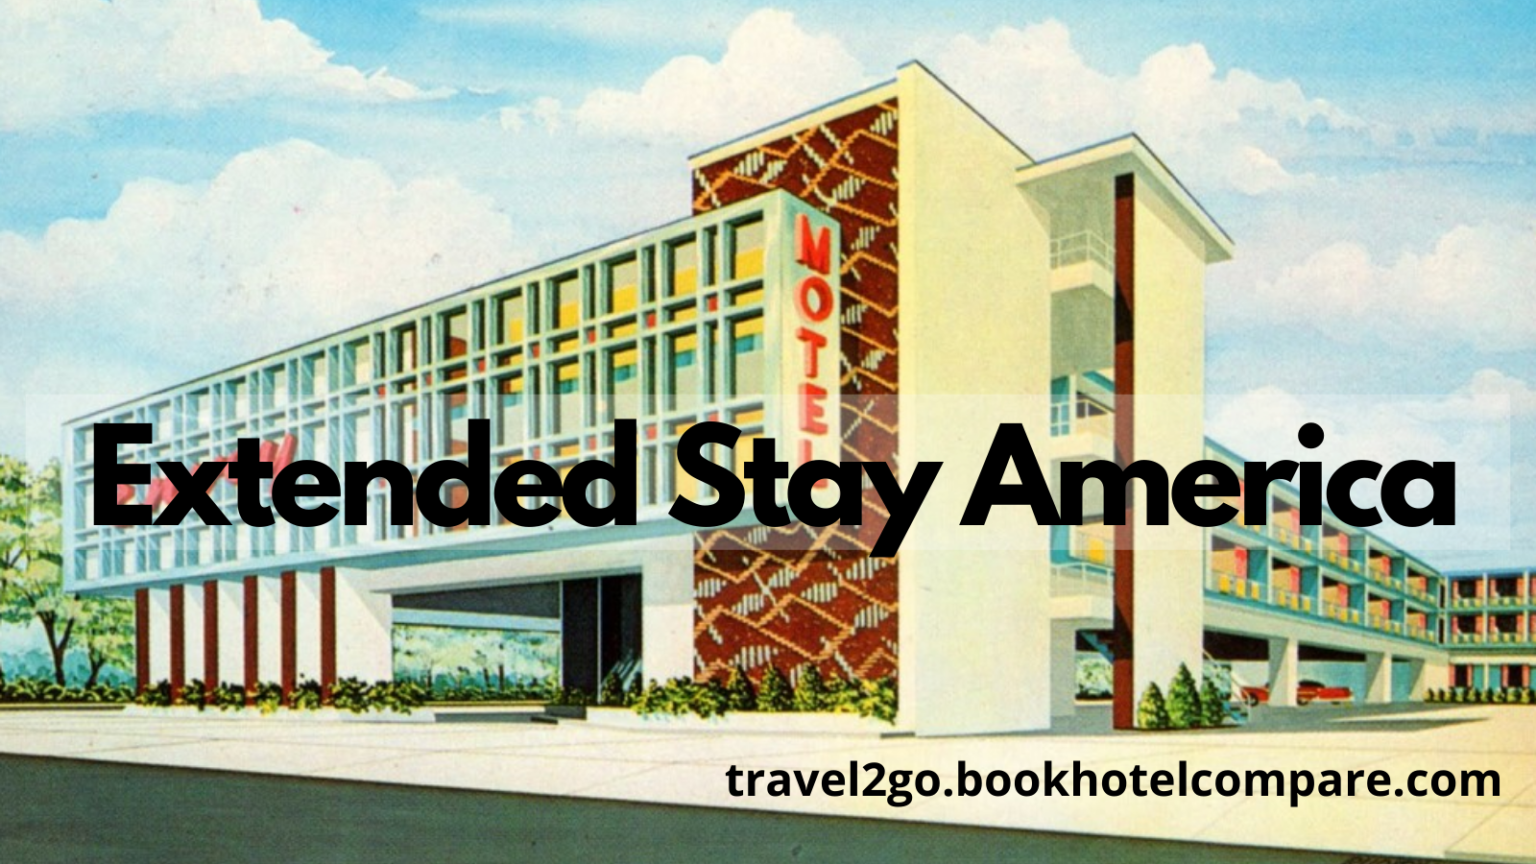 Extended Stay America 1536x864 